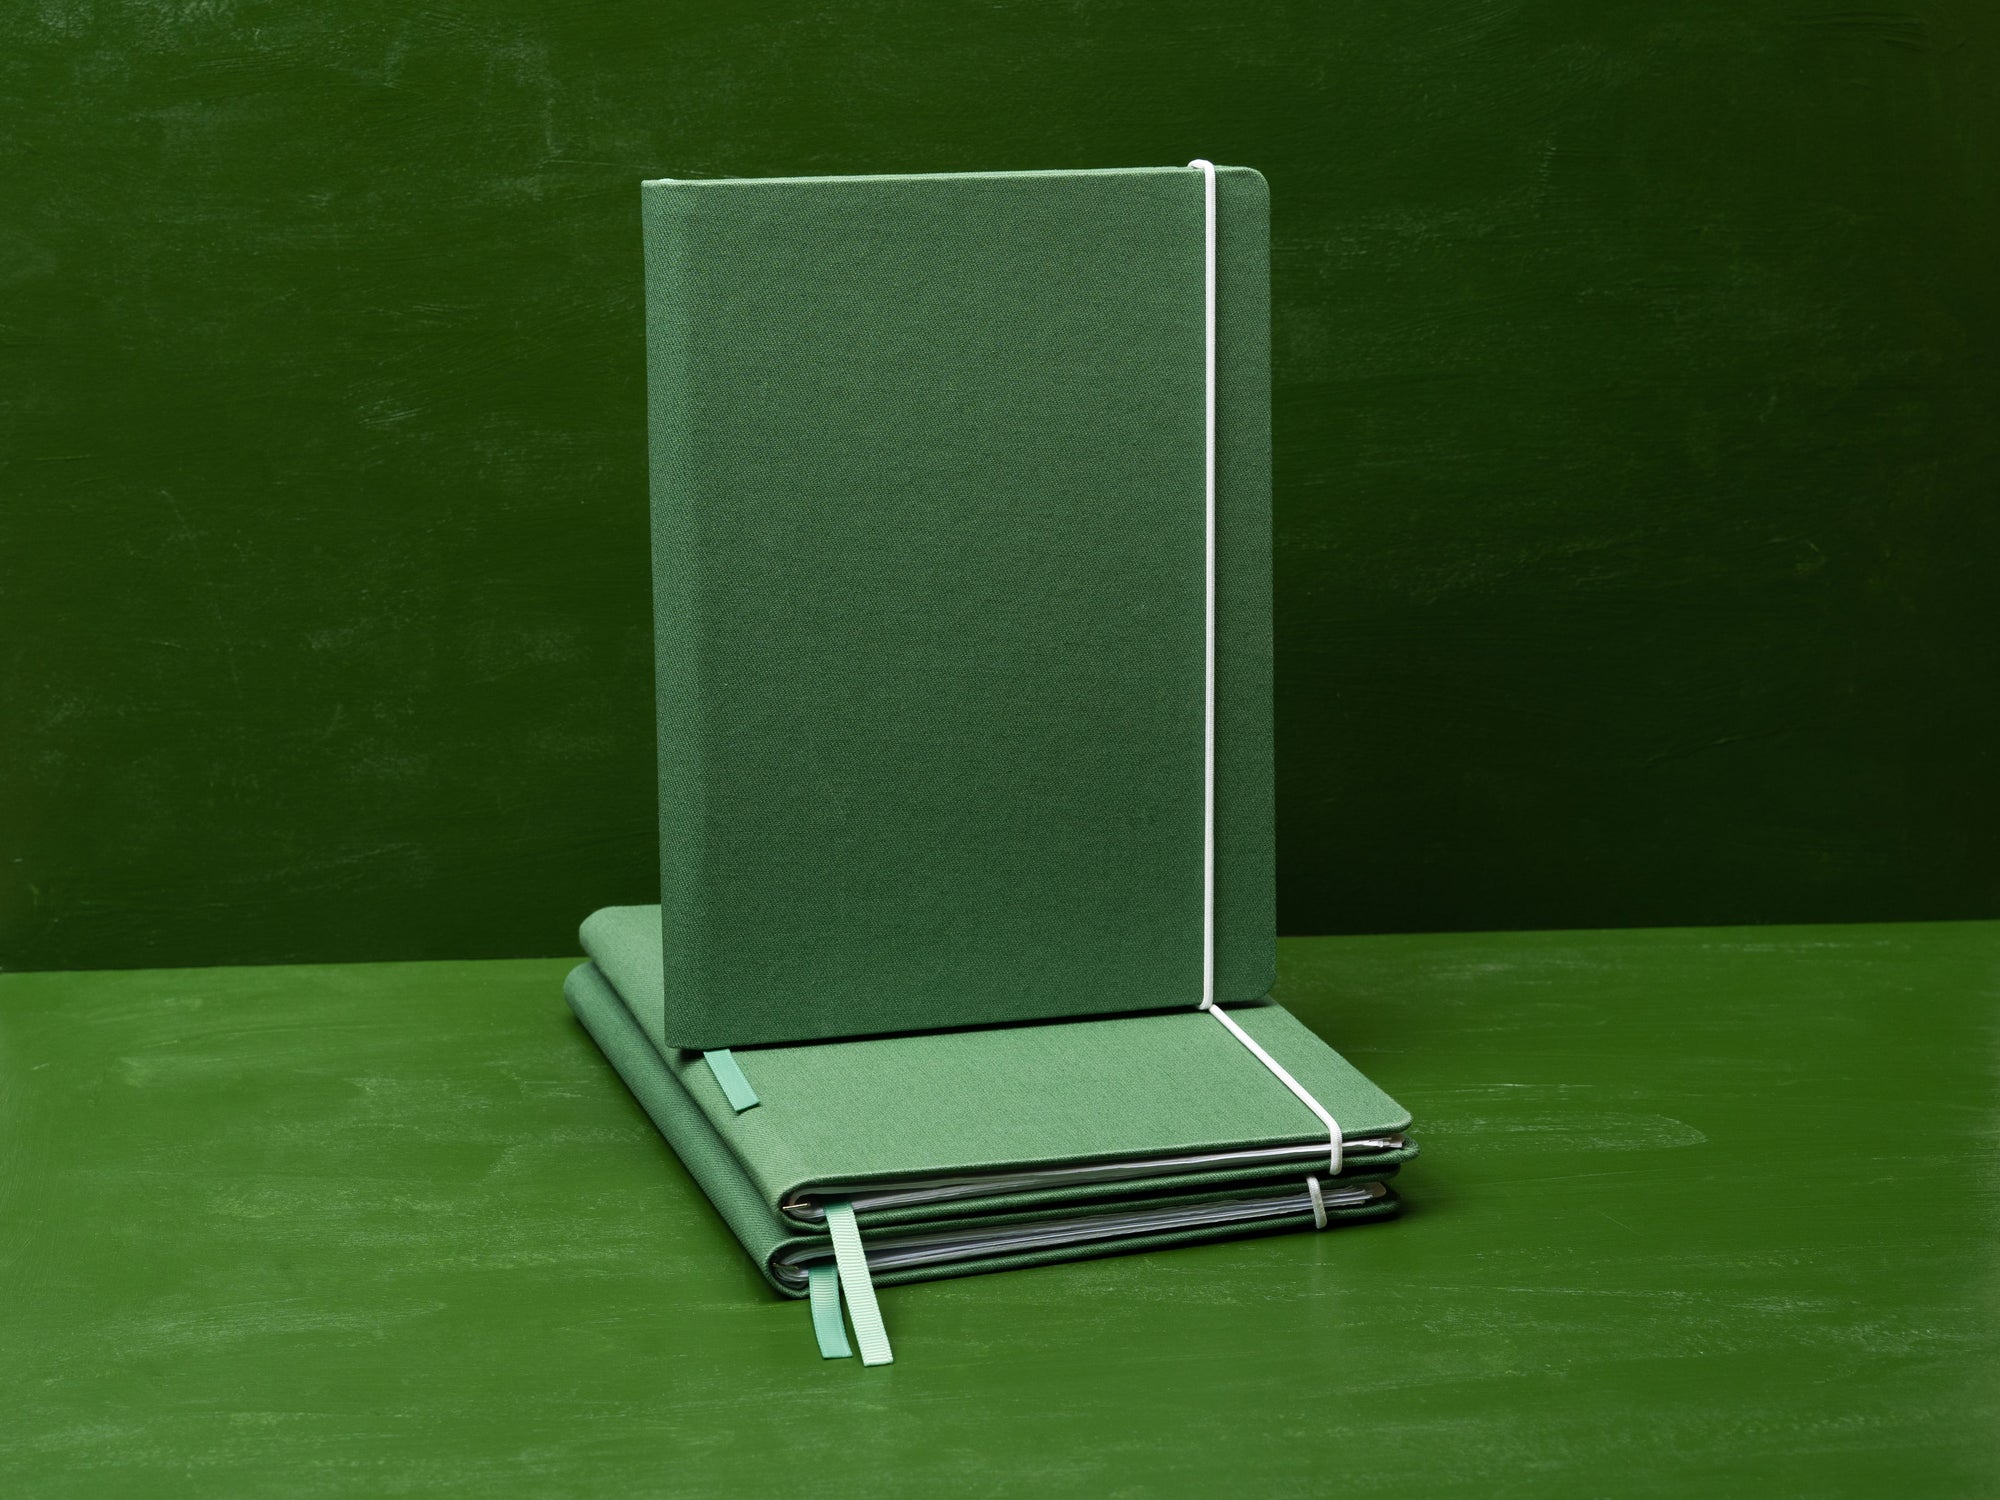 The Canvas Paper Saver Reusable Notebook in Thyme Green is made of 100% cotton